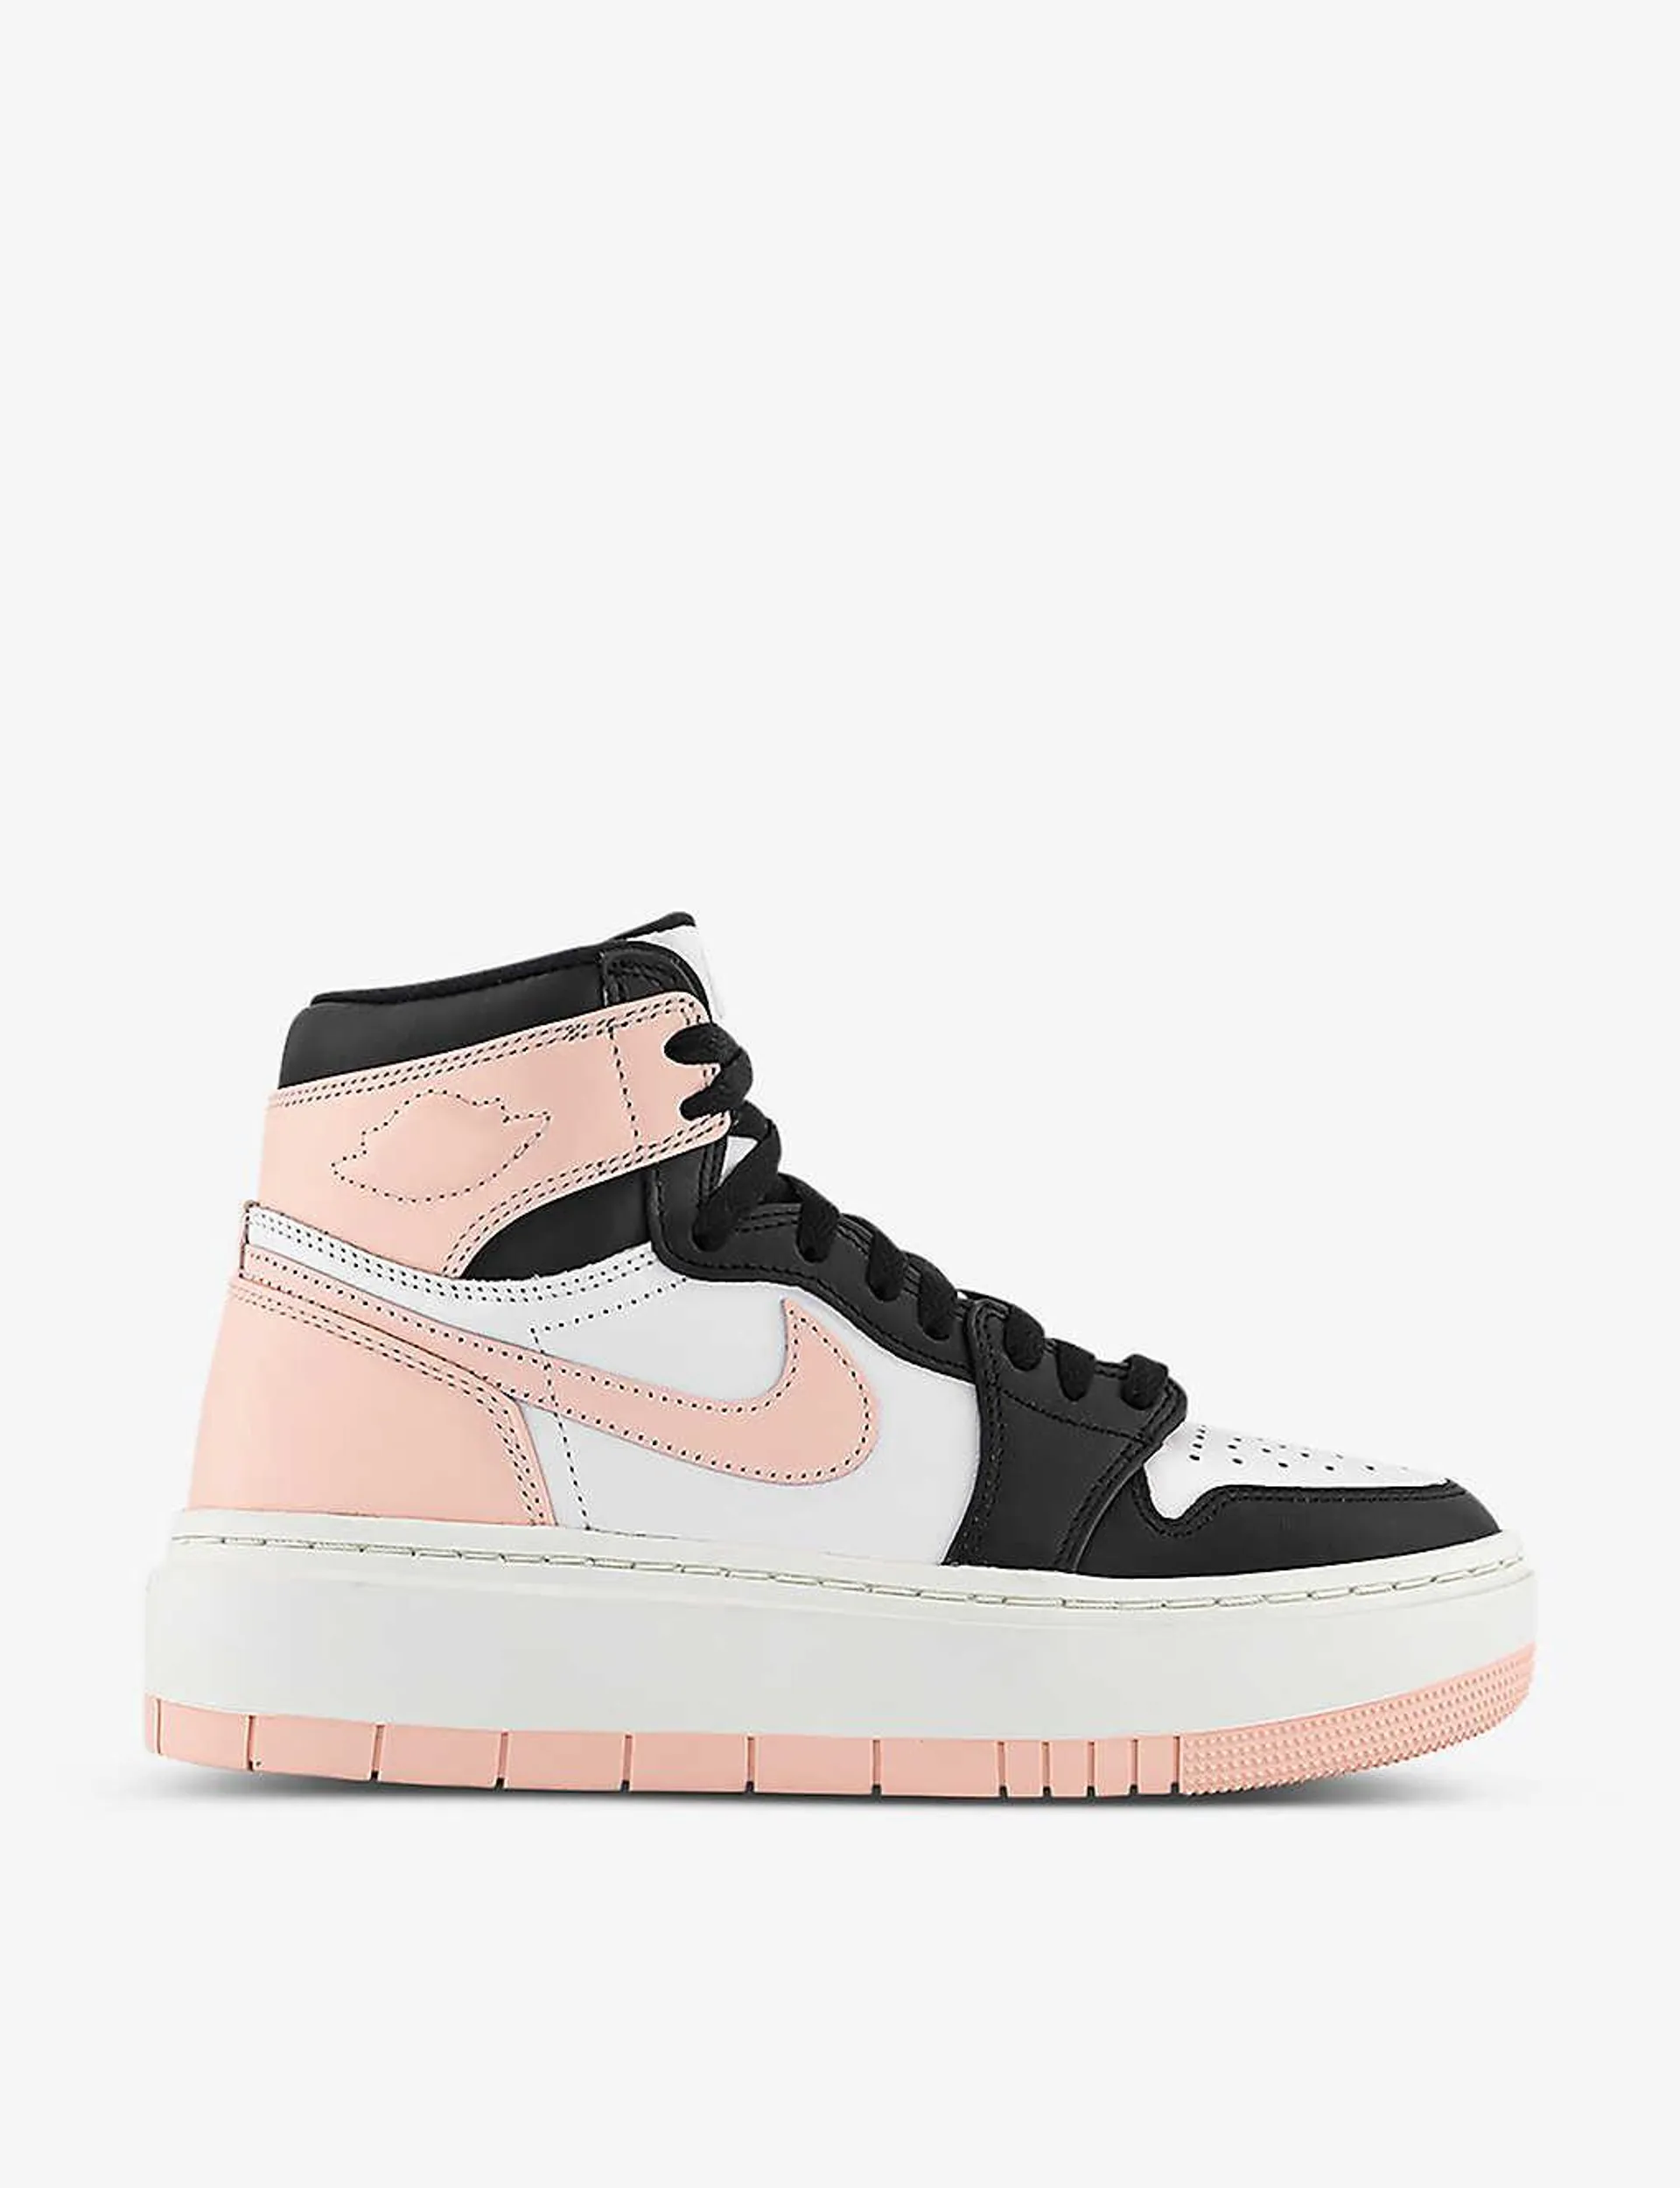 Air Jordan 1 Elevate Swoosh-embellished leather high-top trainers